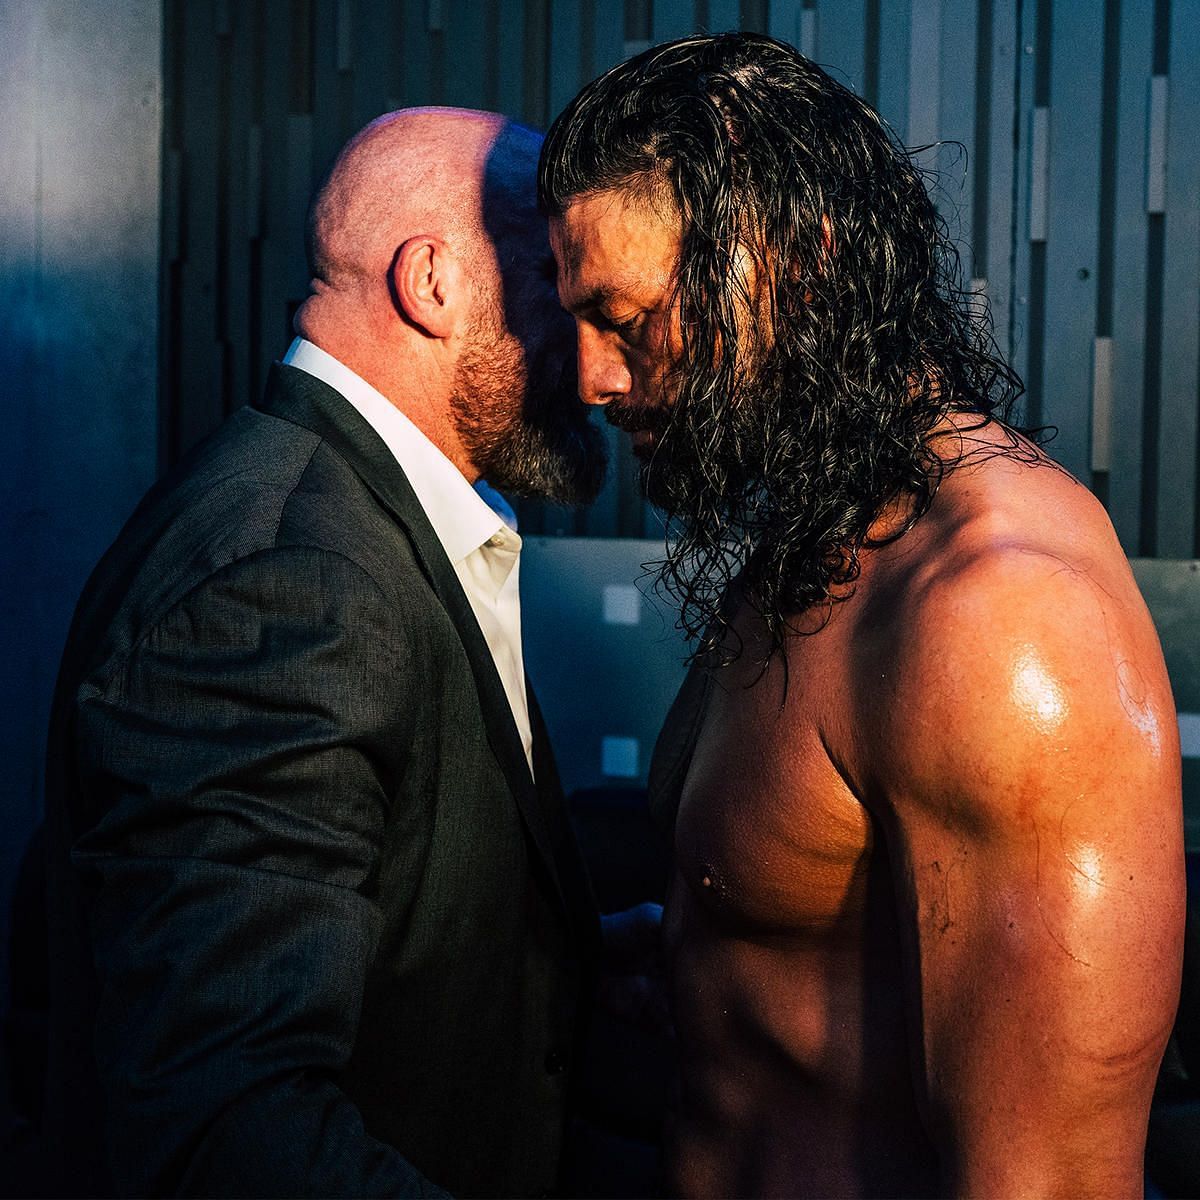 Triple H and Roman Reigns